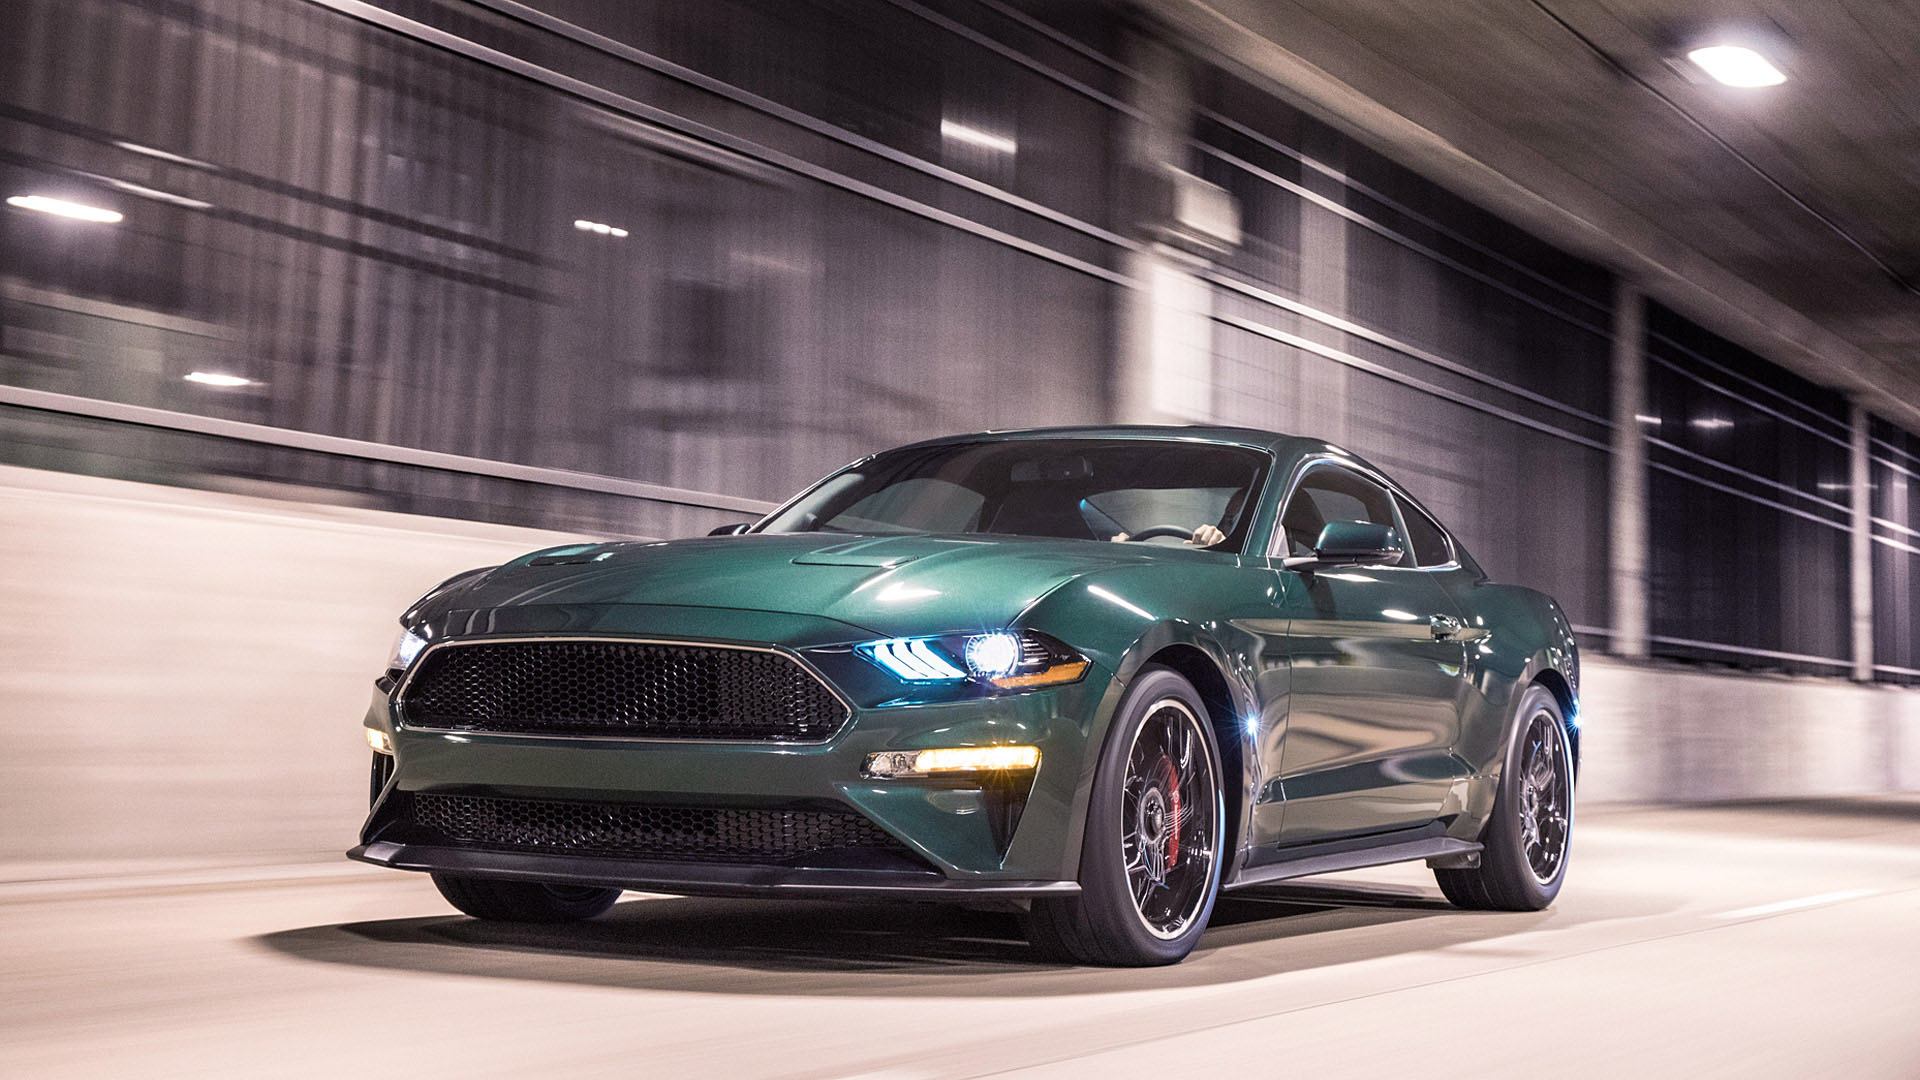 2019 Ford Mustang Bullitt Wallpapers HD Images   WSupercars